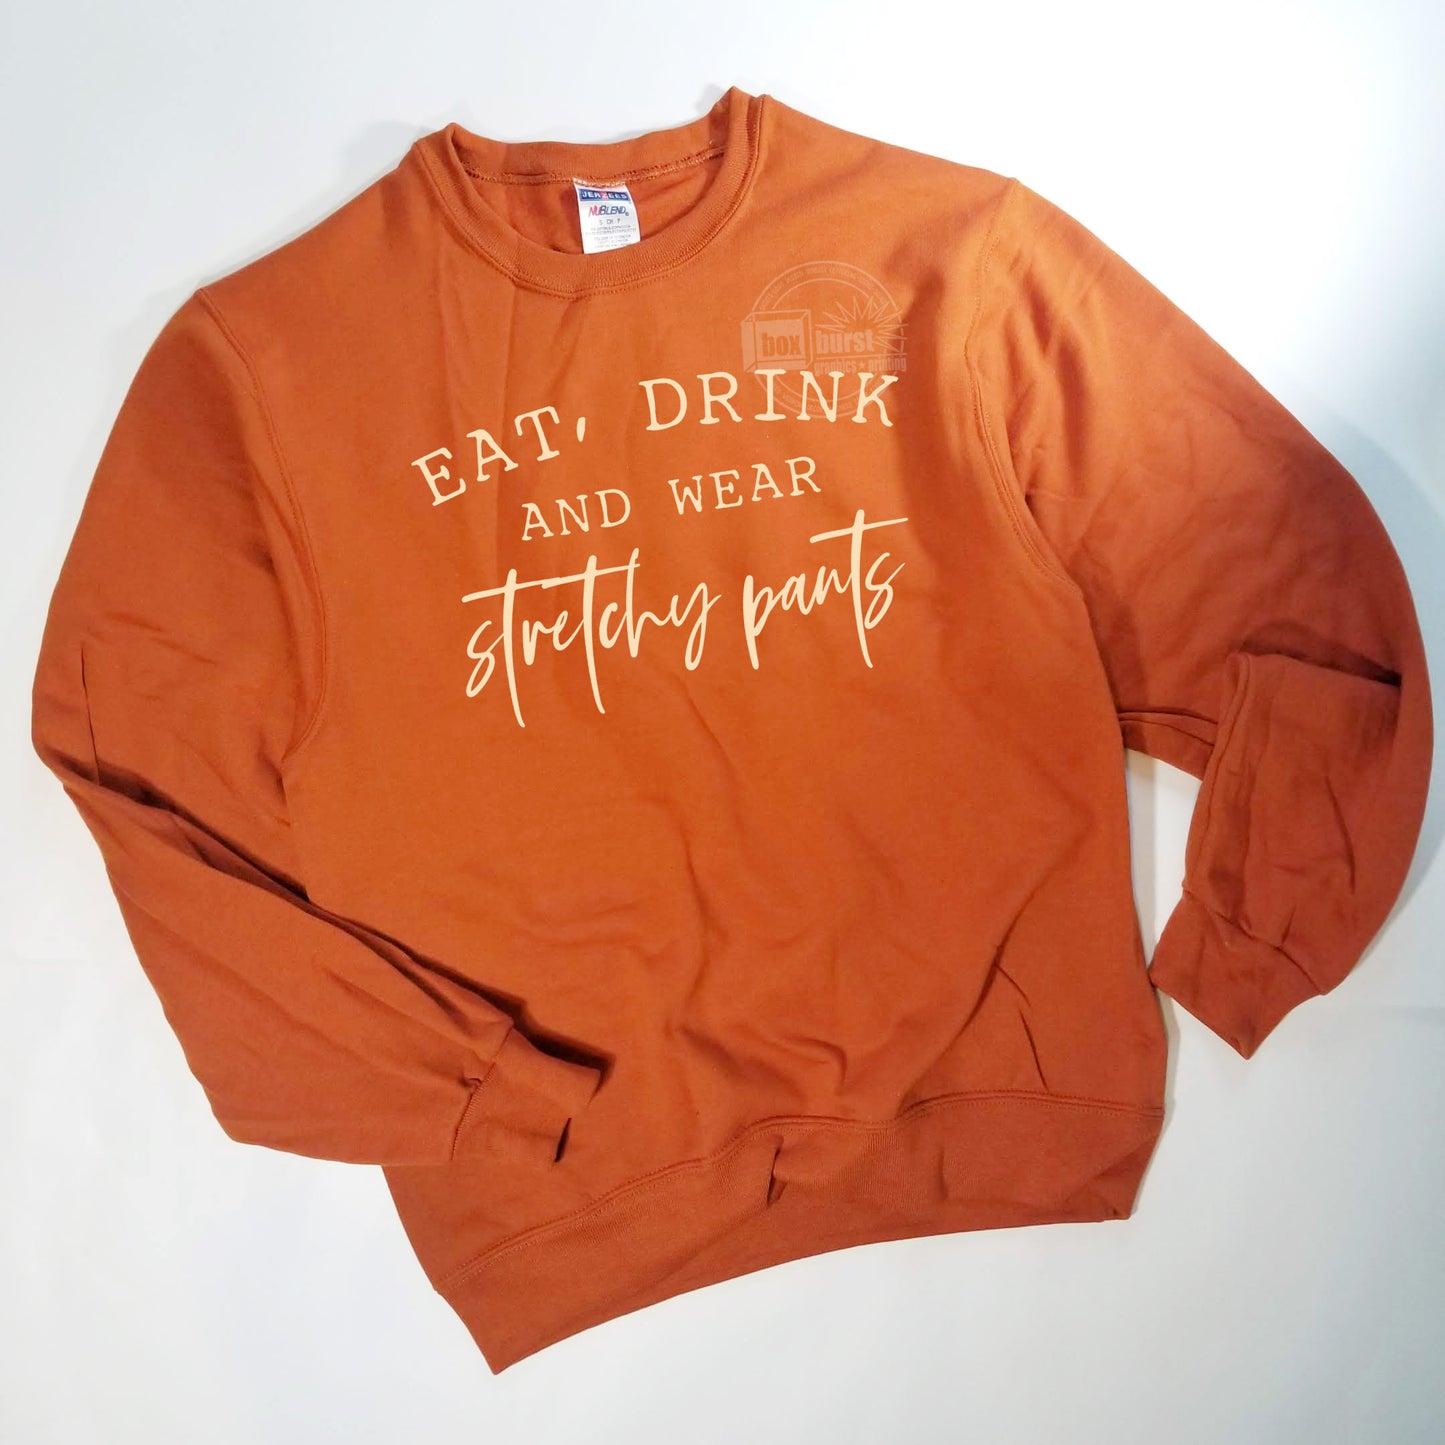 Eat, Drink, and wear stretchy pants crew neck sweater unisex